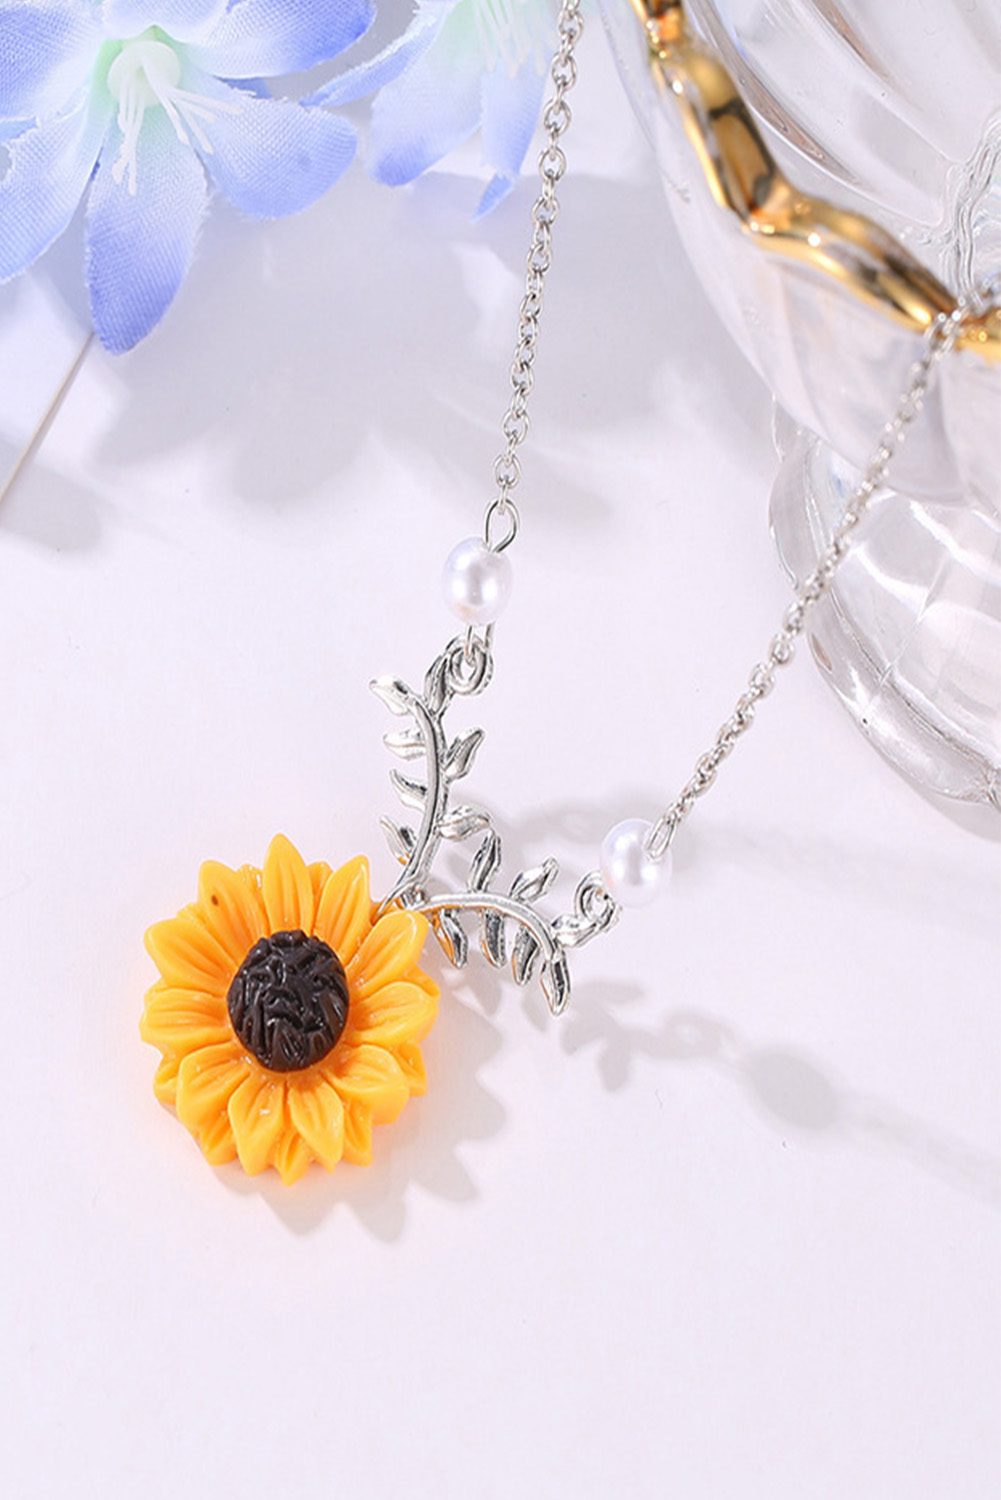 New arrivals 2023 Silver Sunflower CHARM Chain Necklace Jewelry